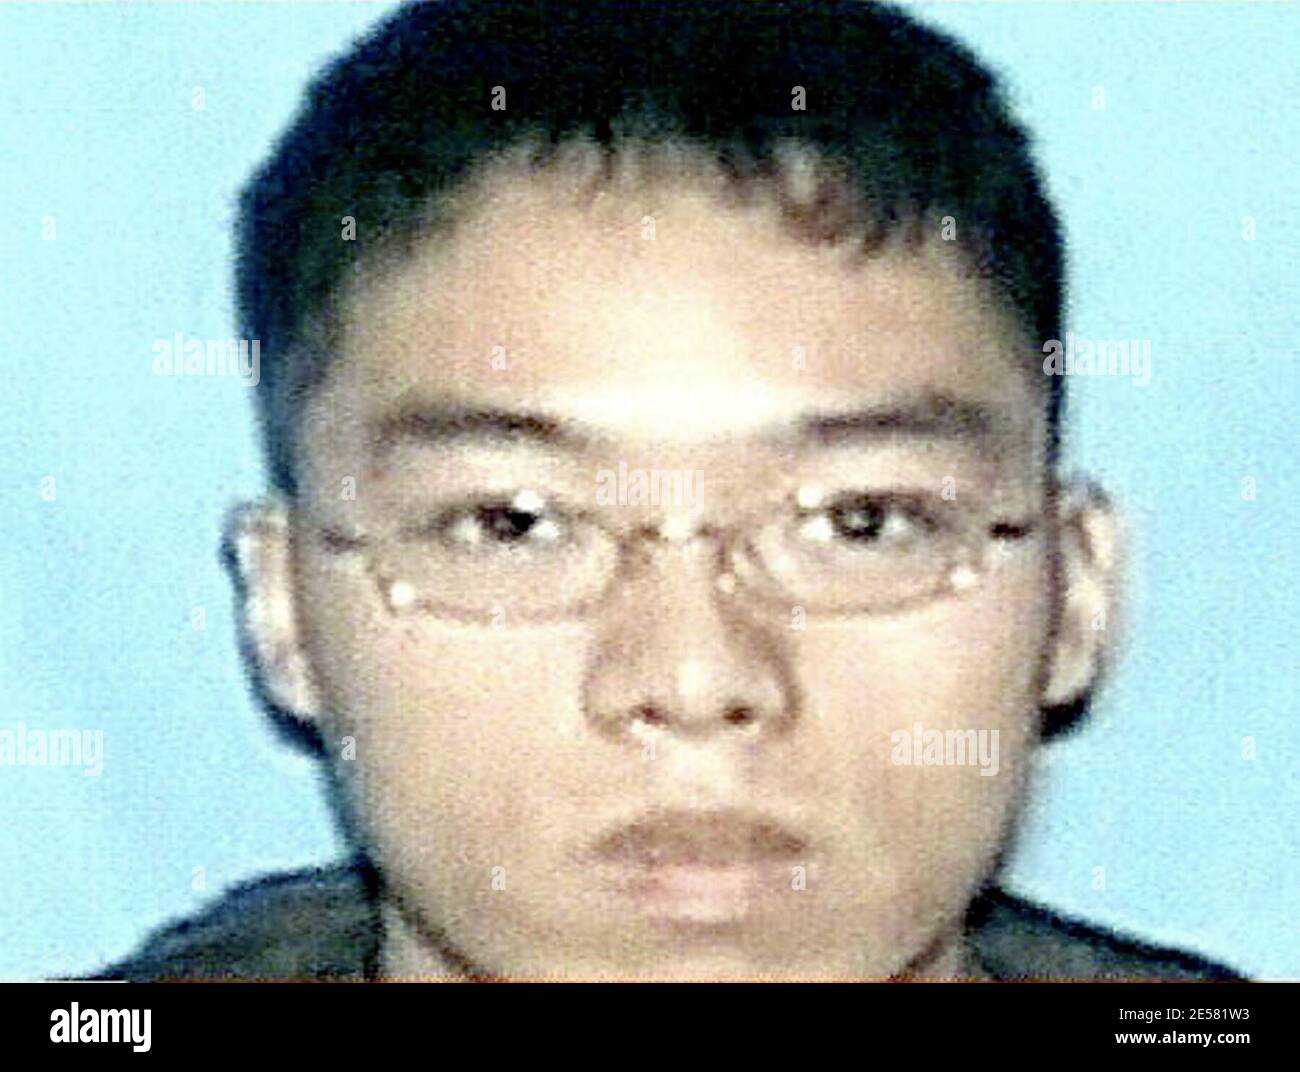 23-year old South Korean student at Virginia Tech University, Cho Seung-Hui, has been identified as the gunman responsible for the massacre at the campus yesterday that left 32 people dead. 4/17/07.   [[ral]] Stock Photo